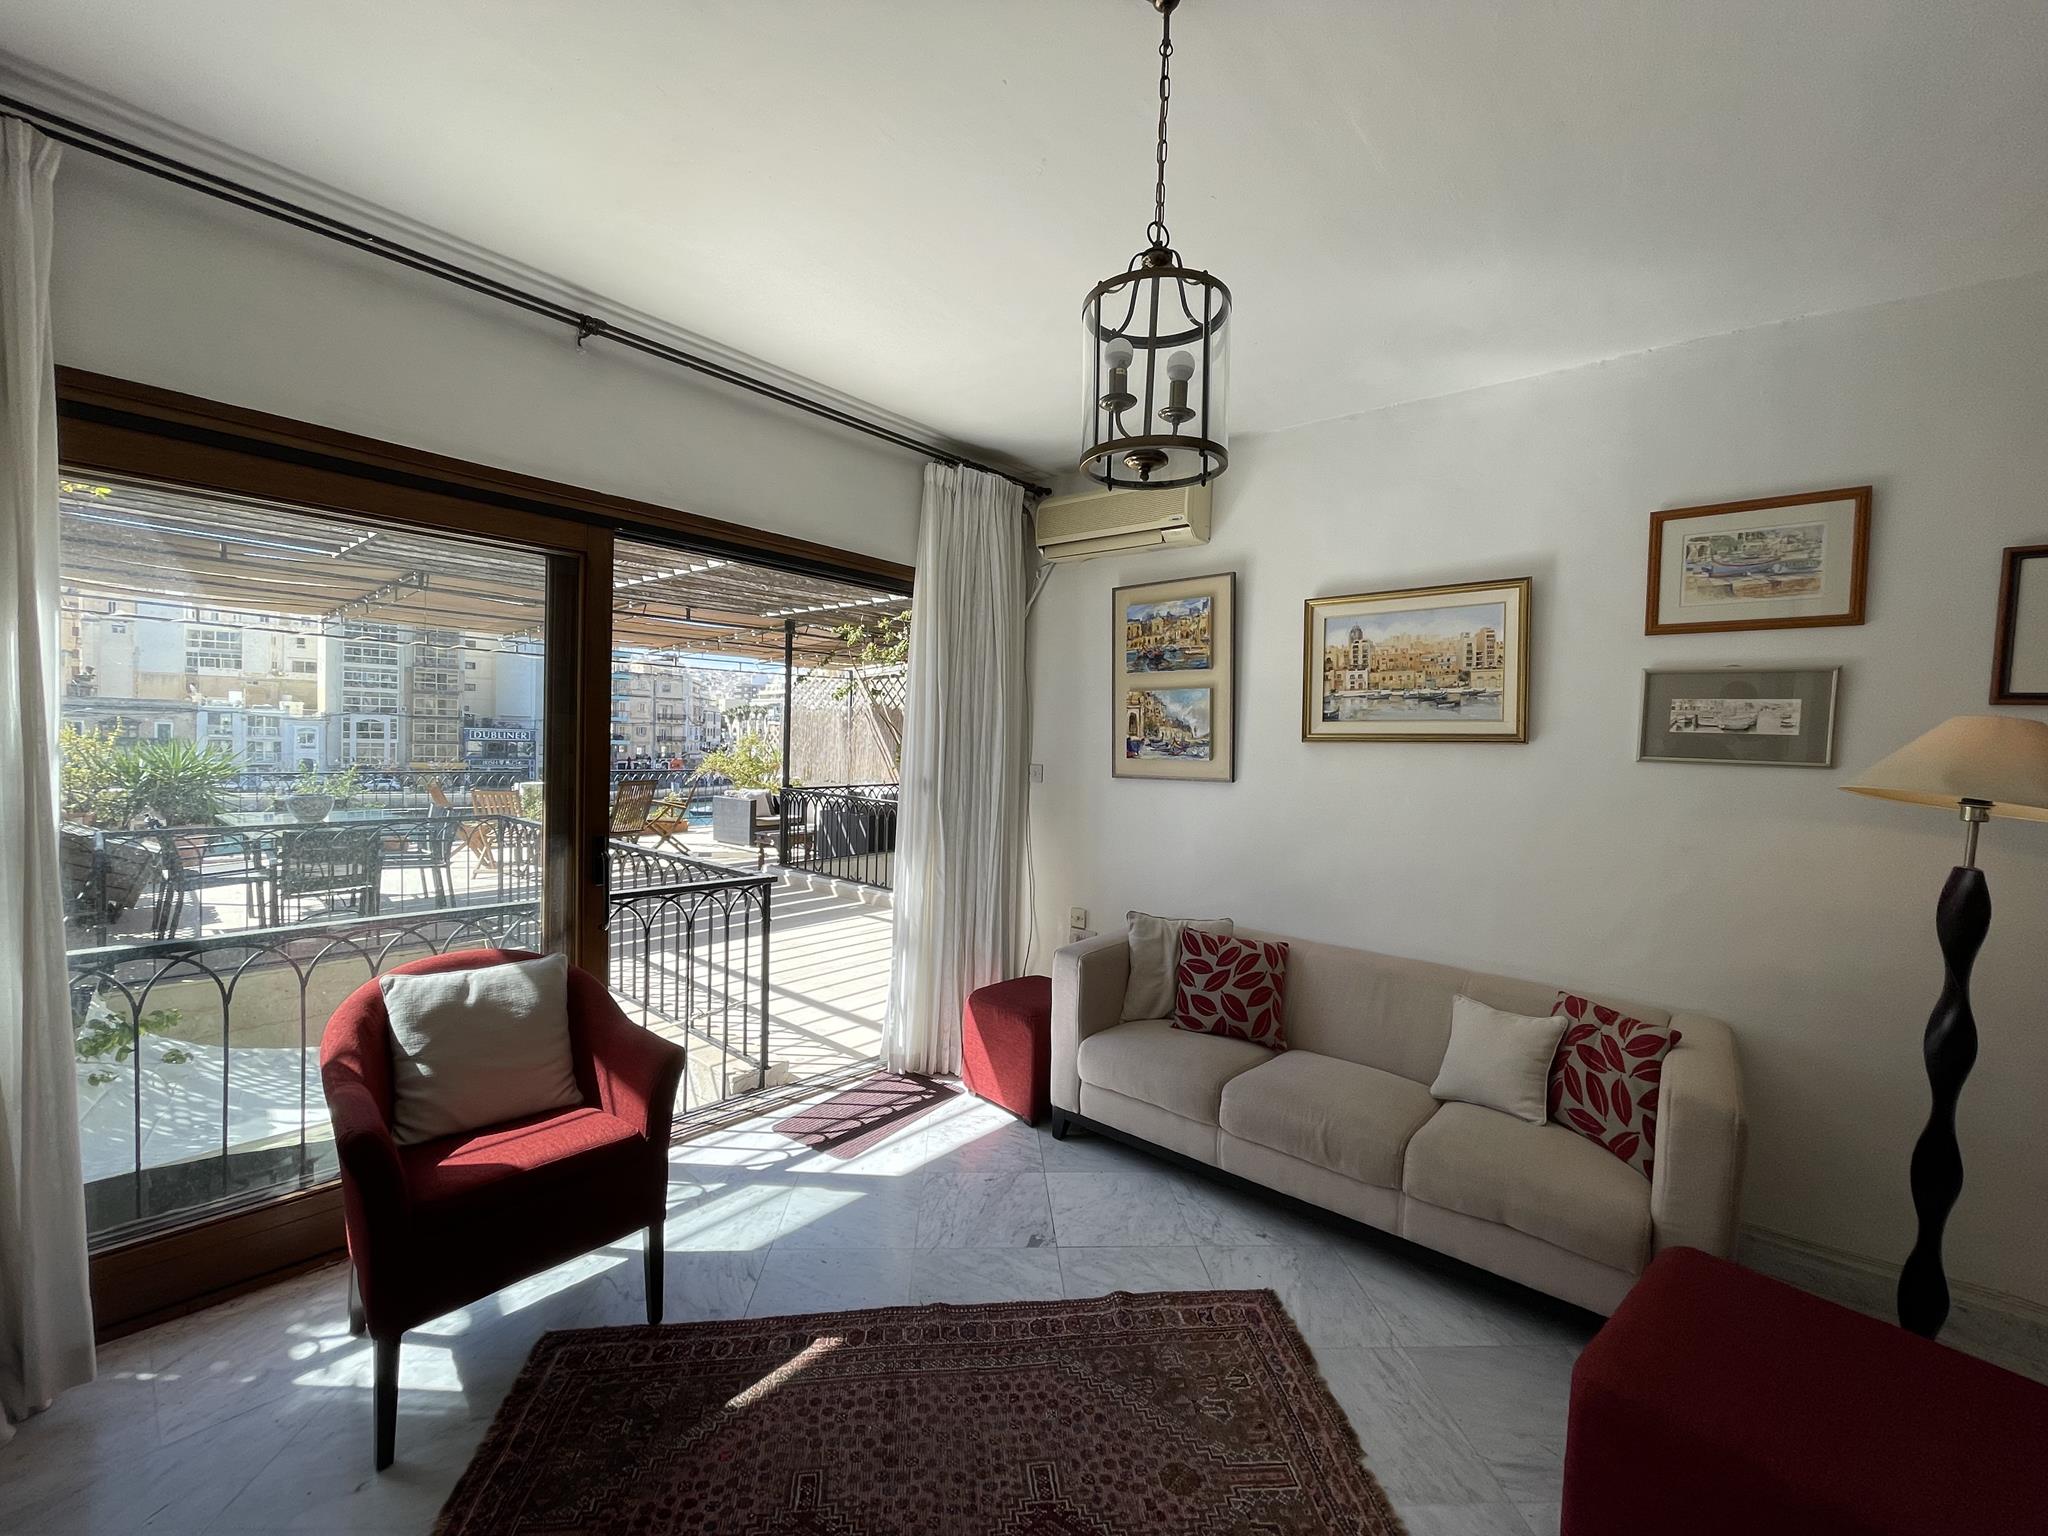 St Julians, Seafront Town House - Ref No 000688 - Image 4